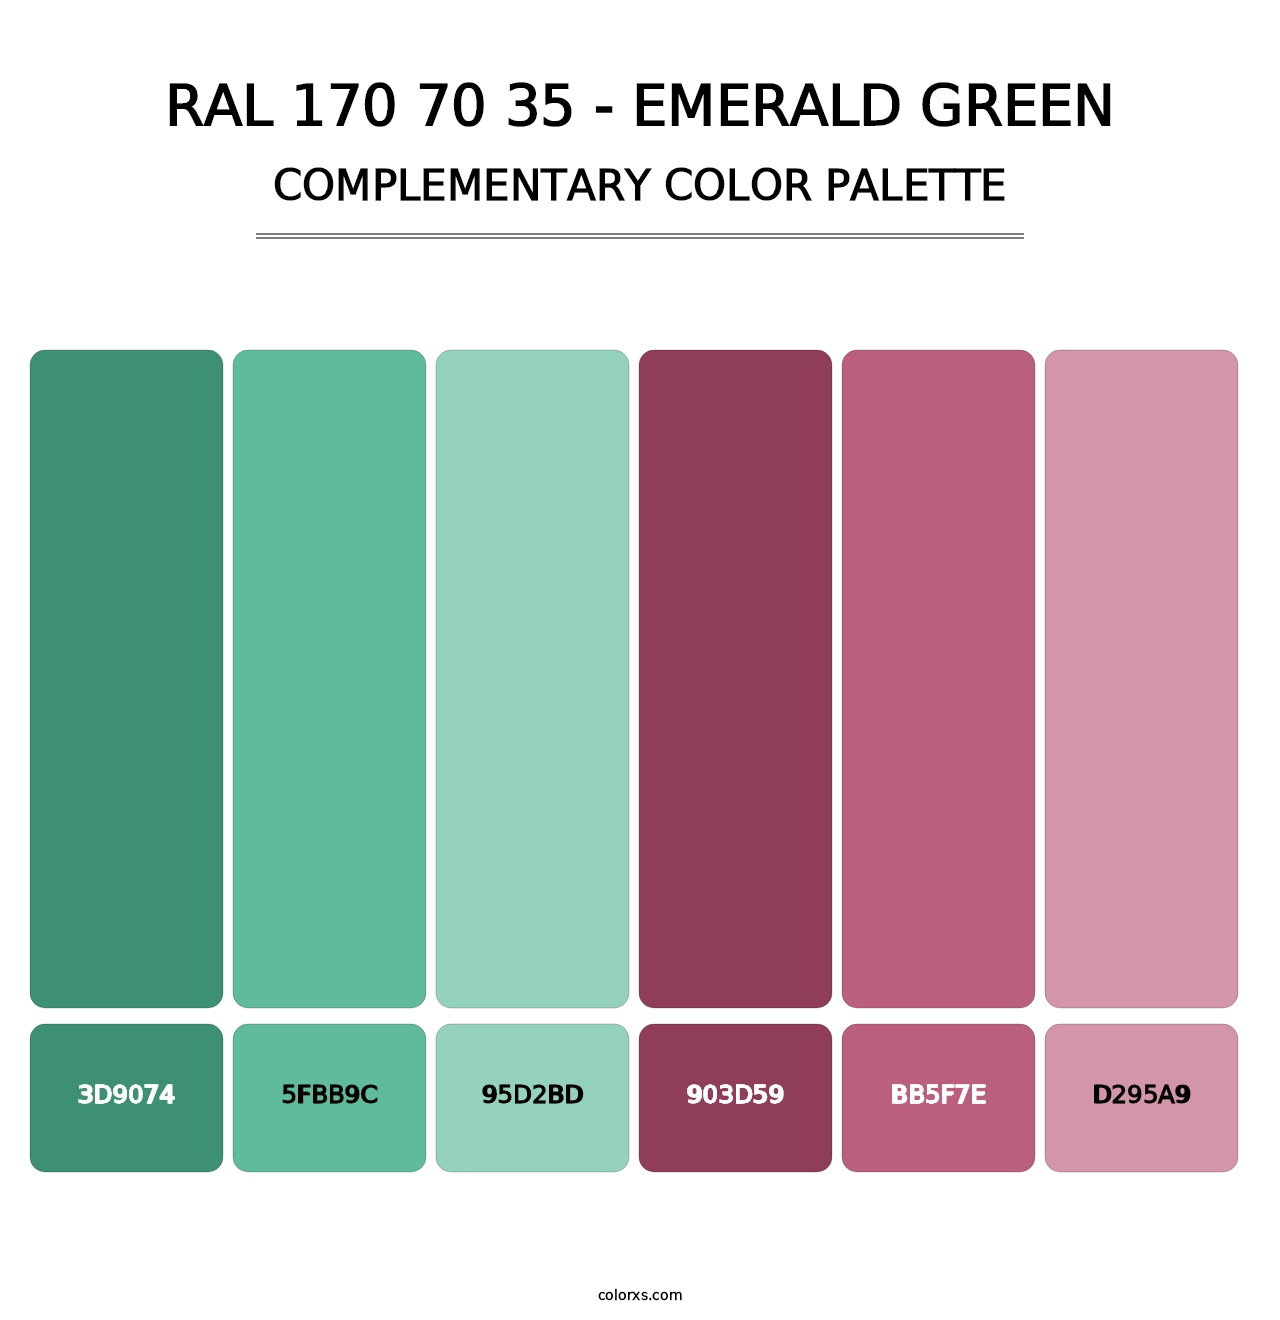 RAL 170 70 35 - Emerald Green - Complementary Color Palette